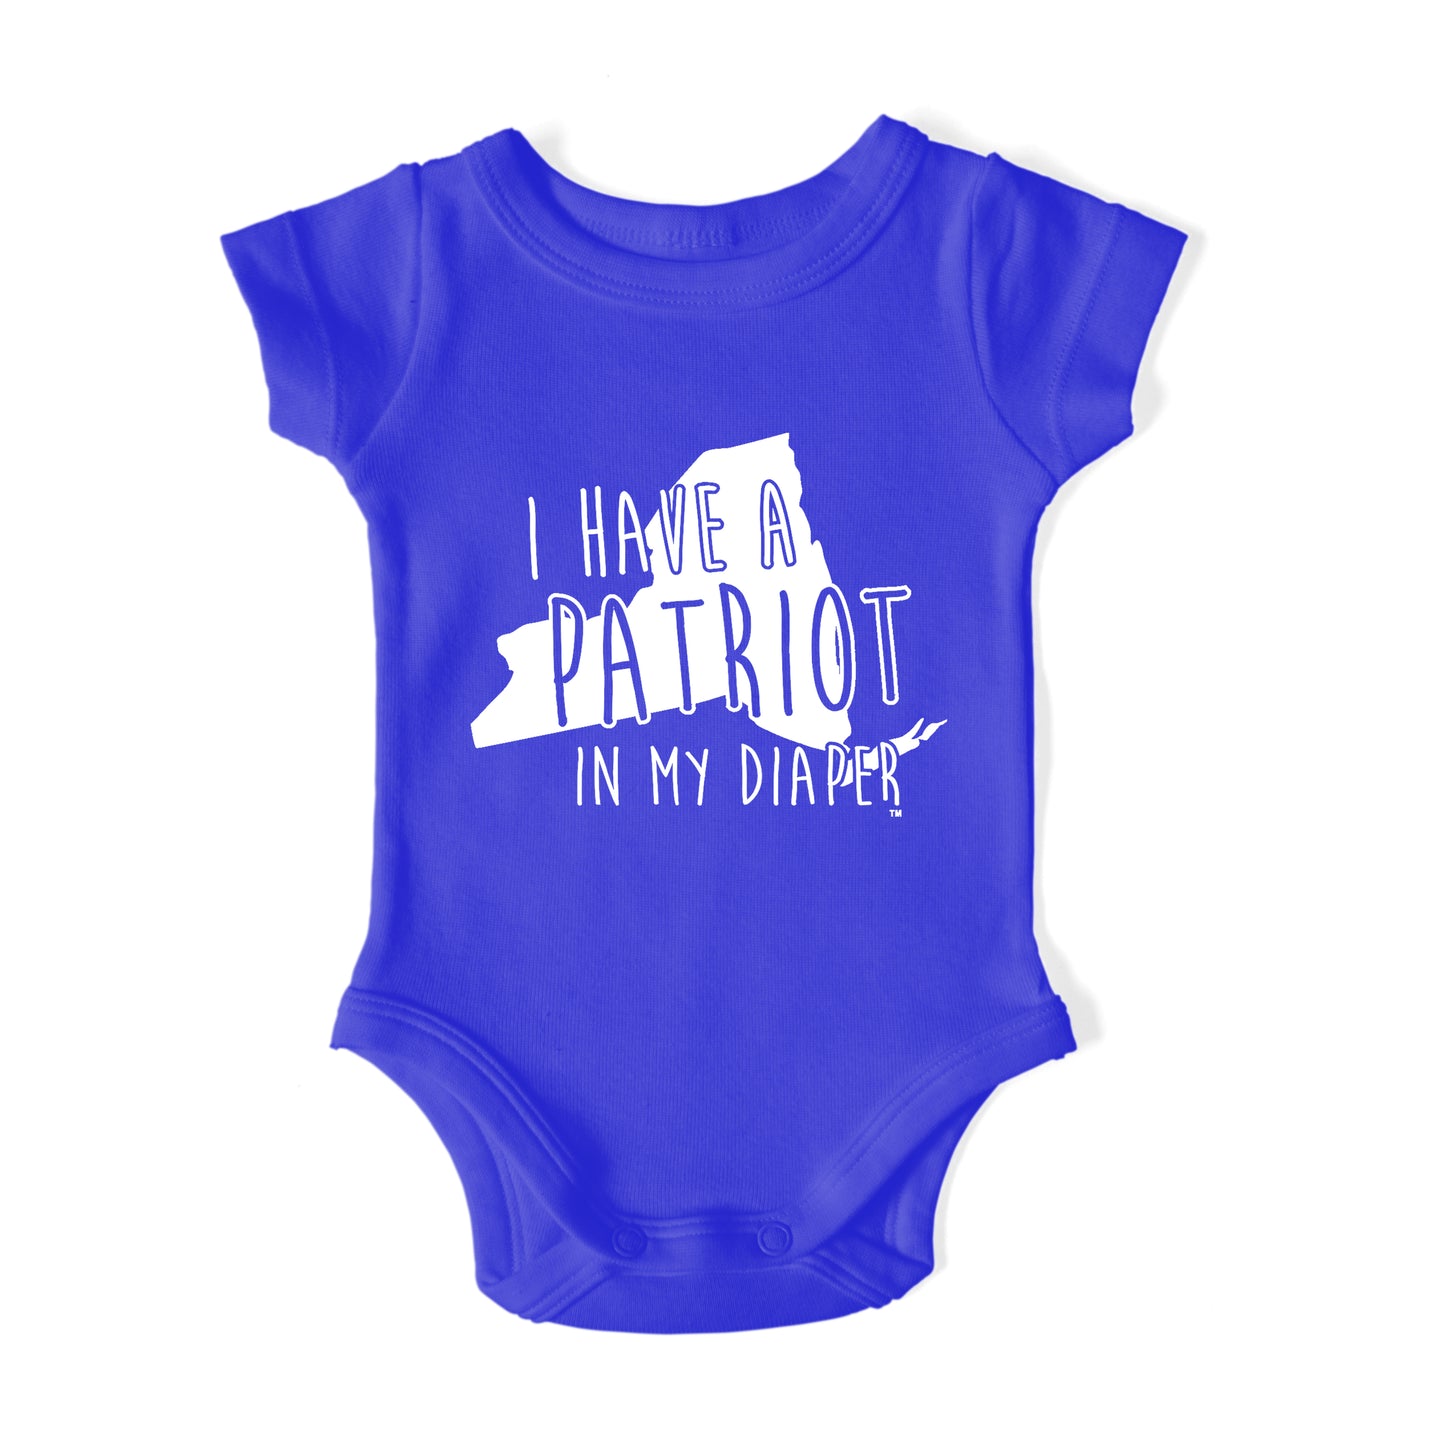 I HAVE A PATRIOT IN MY DIAPER Baby One Piece